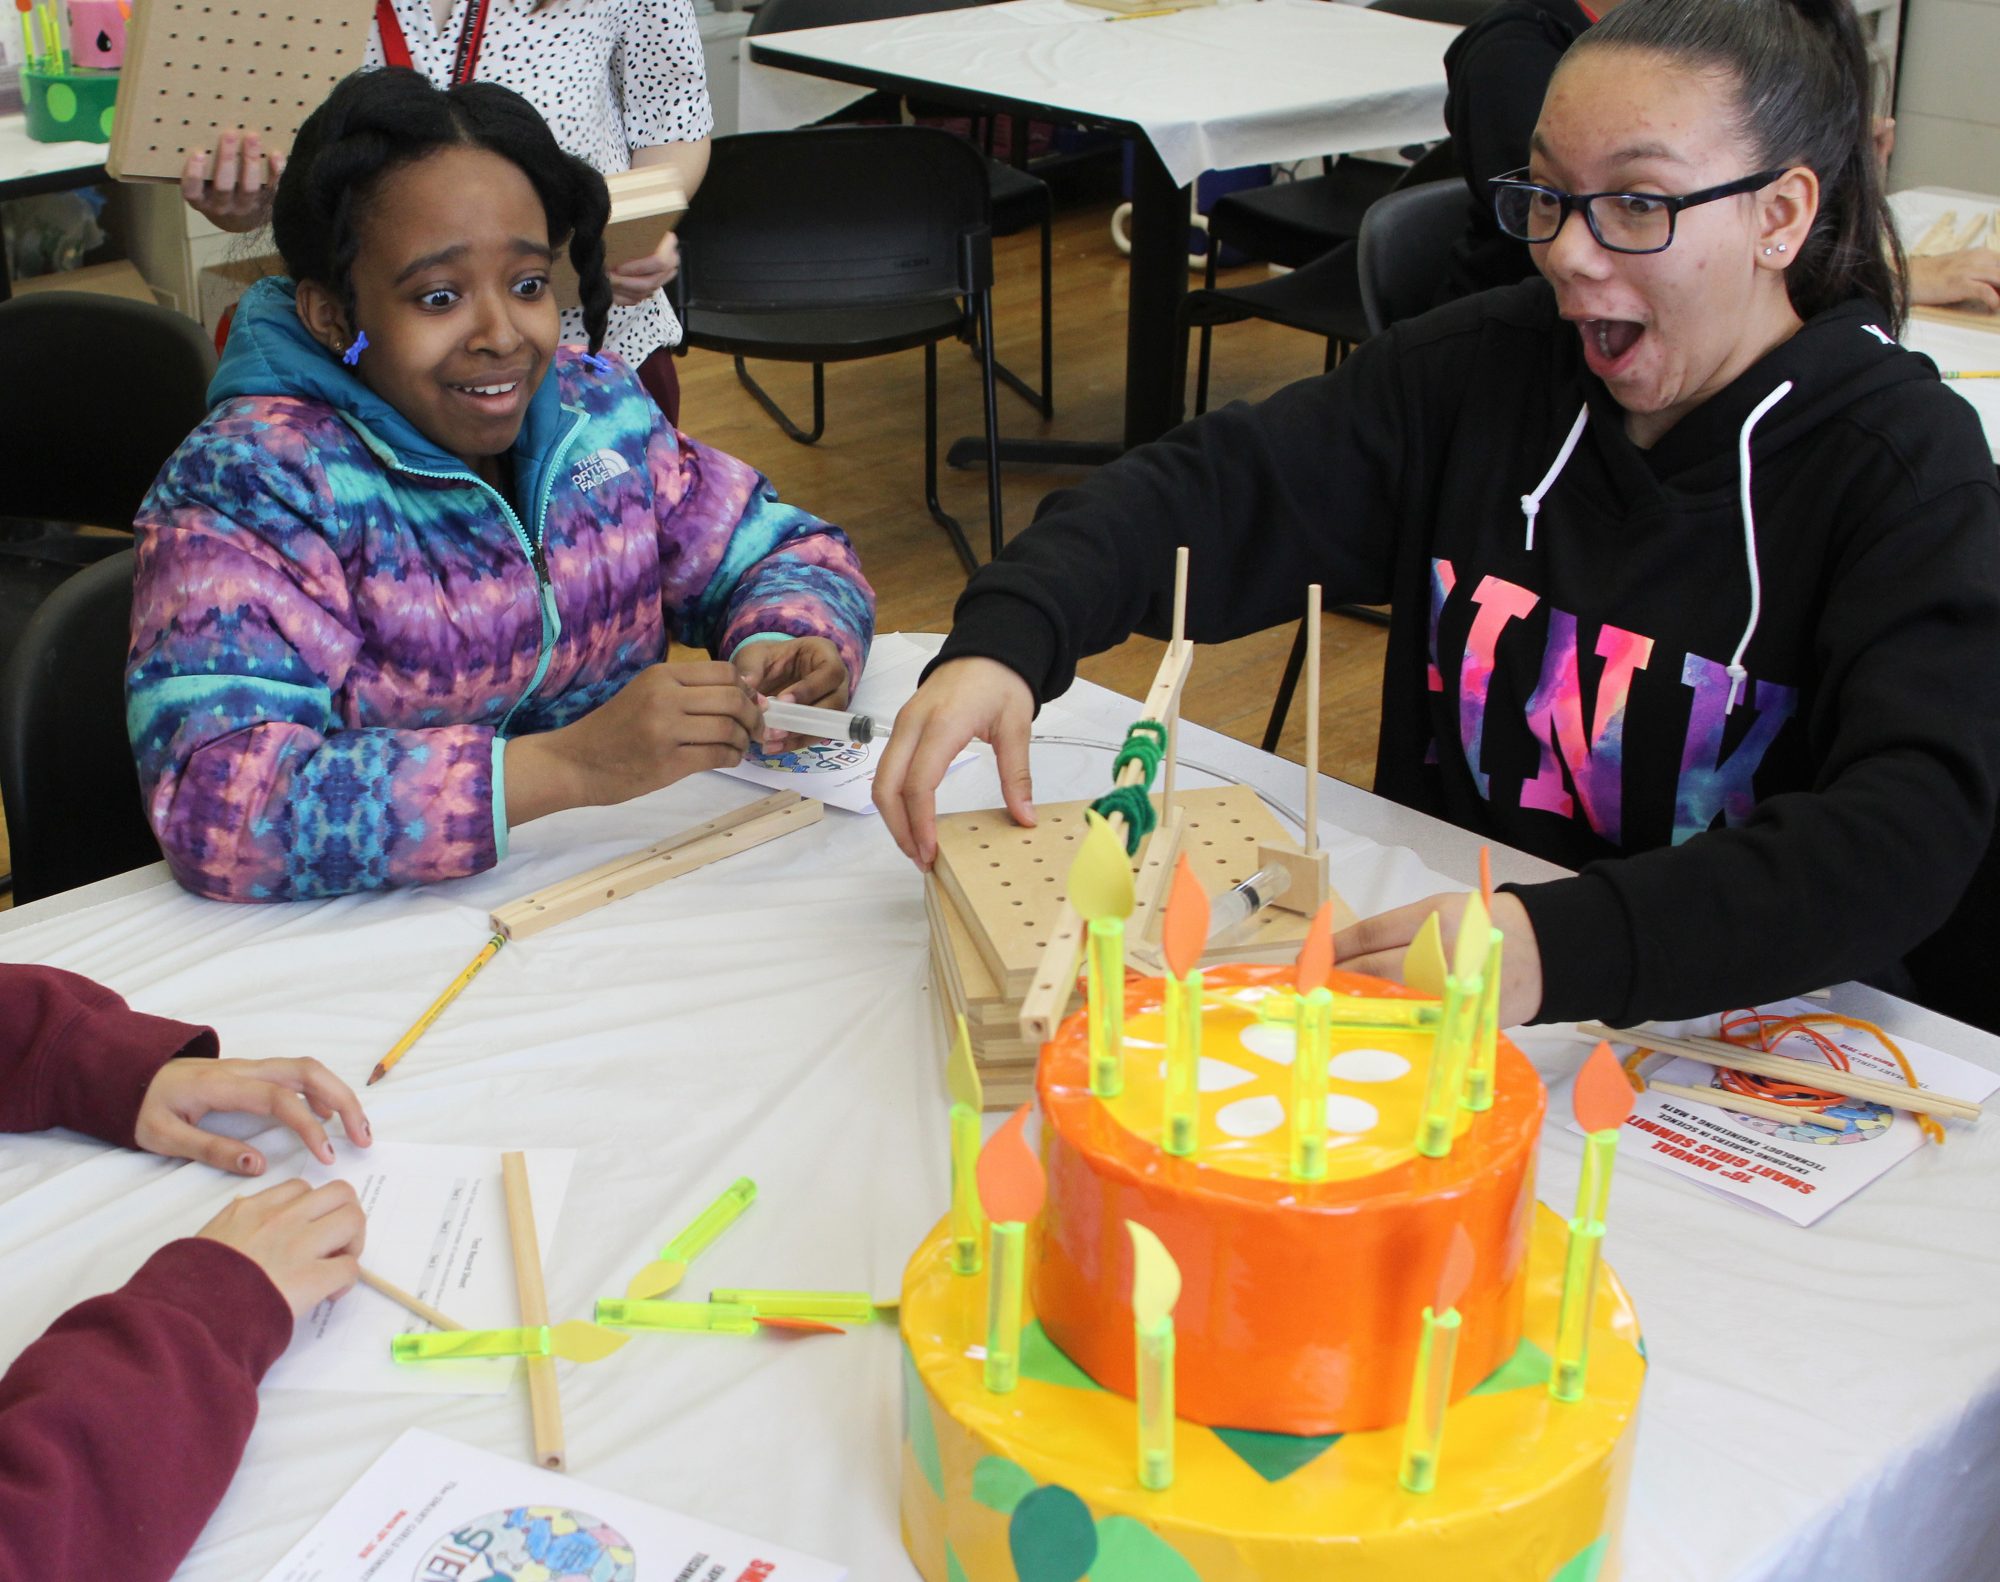 Lynn, Ma. 3-28-18. Myraim Meloncourt, left, and Janessa Lopez have success in the hydraulics workshop at the the 16th annual smart girls summit at Girl's Inc.